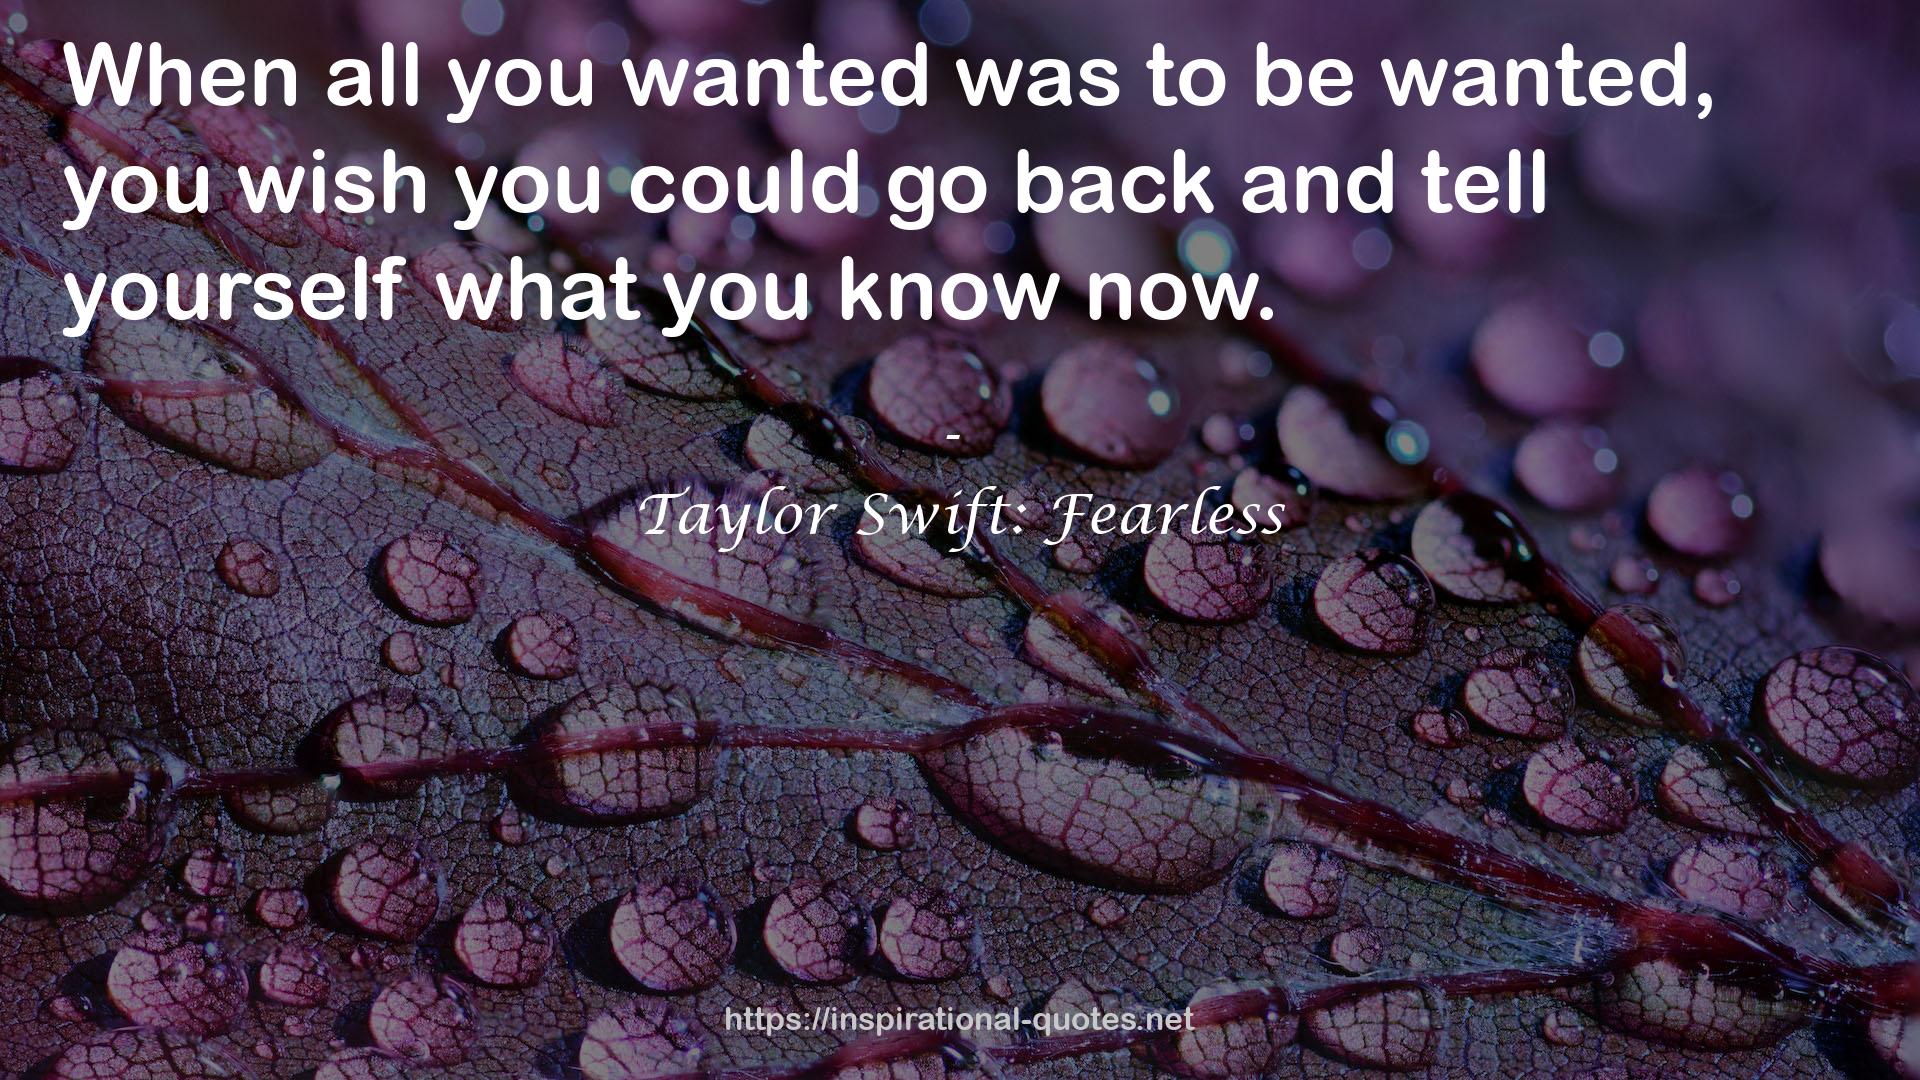 Taylor Swift: Fearless QUOTES